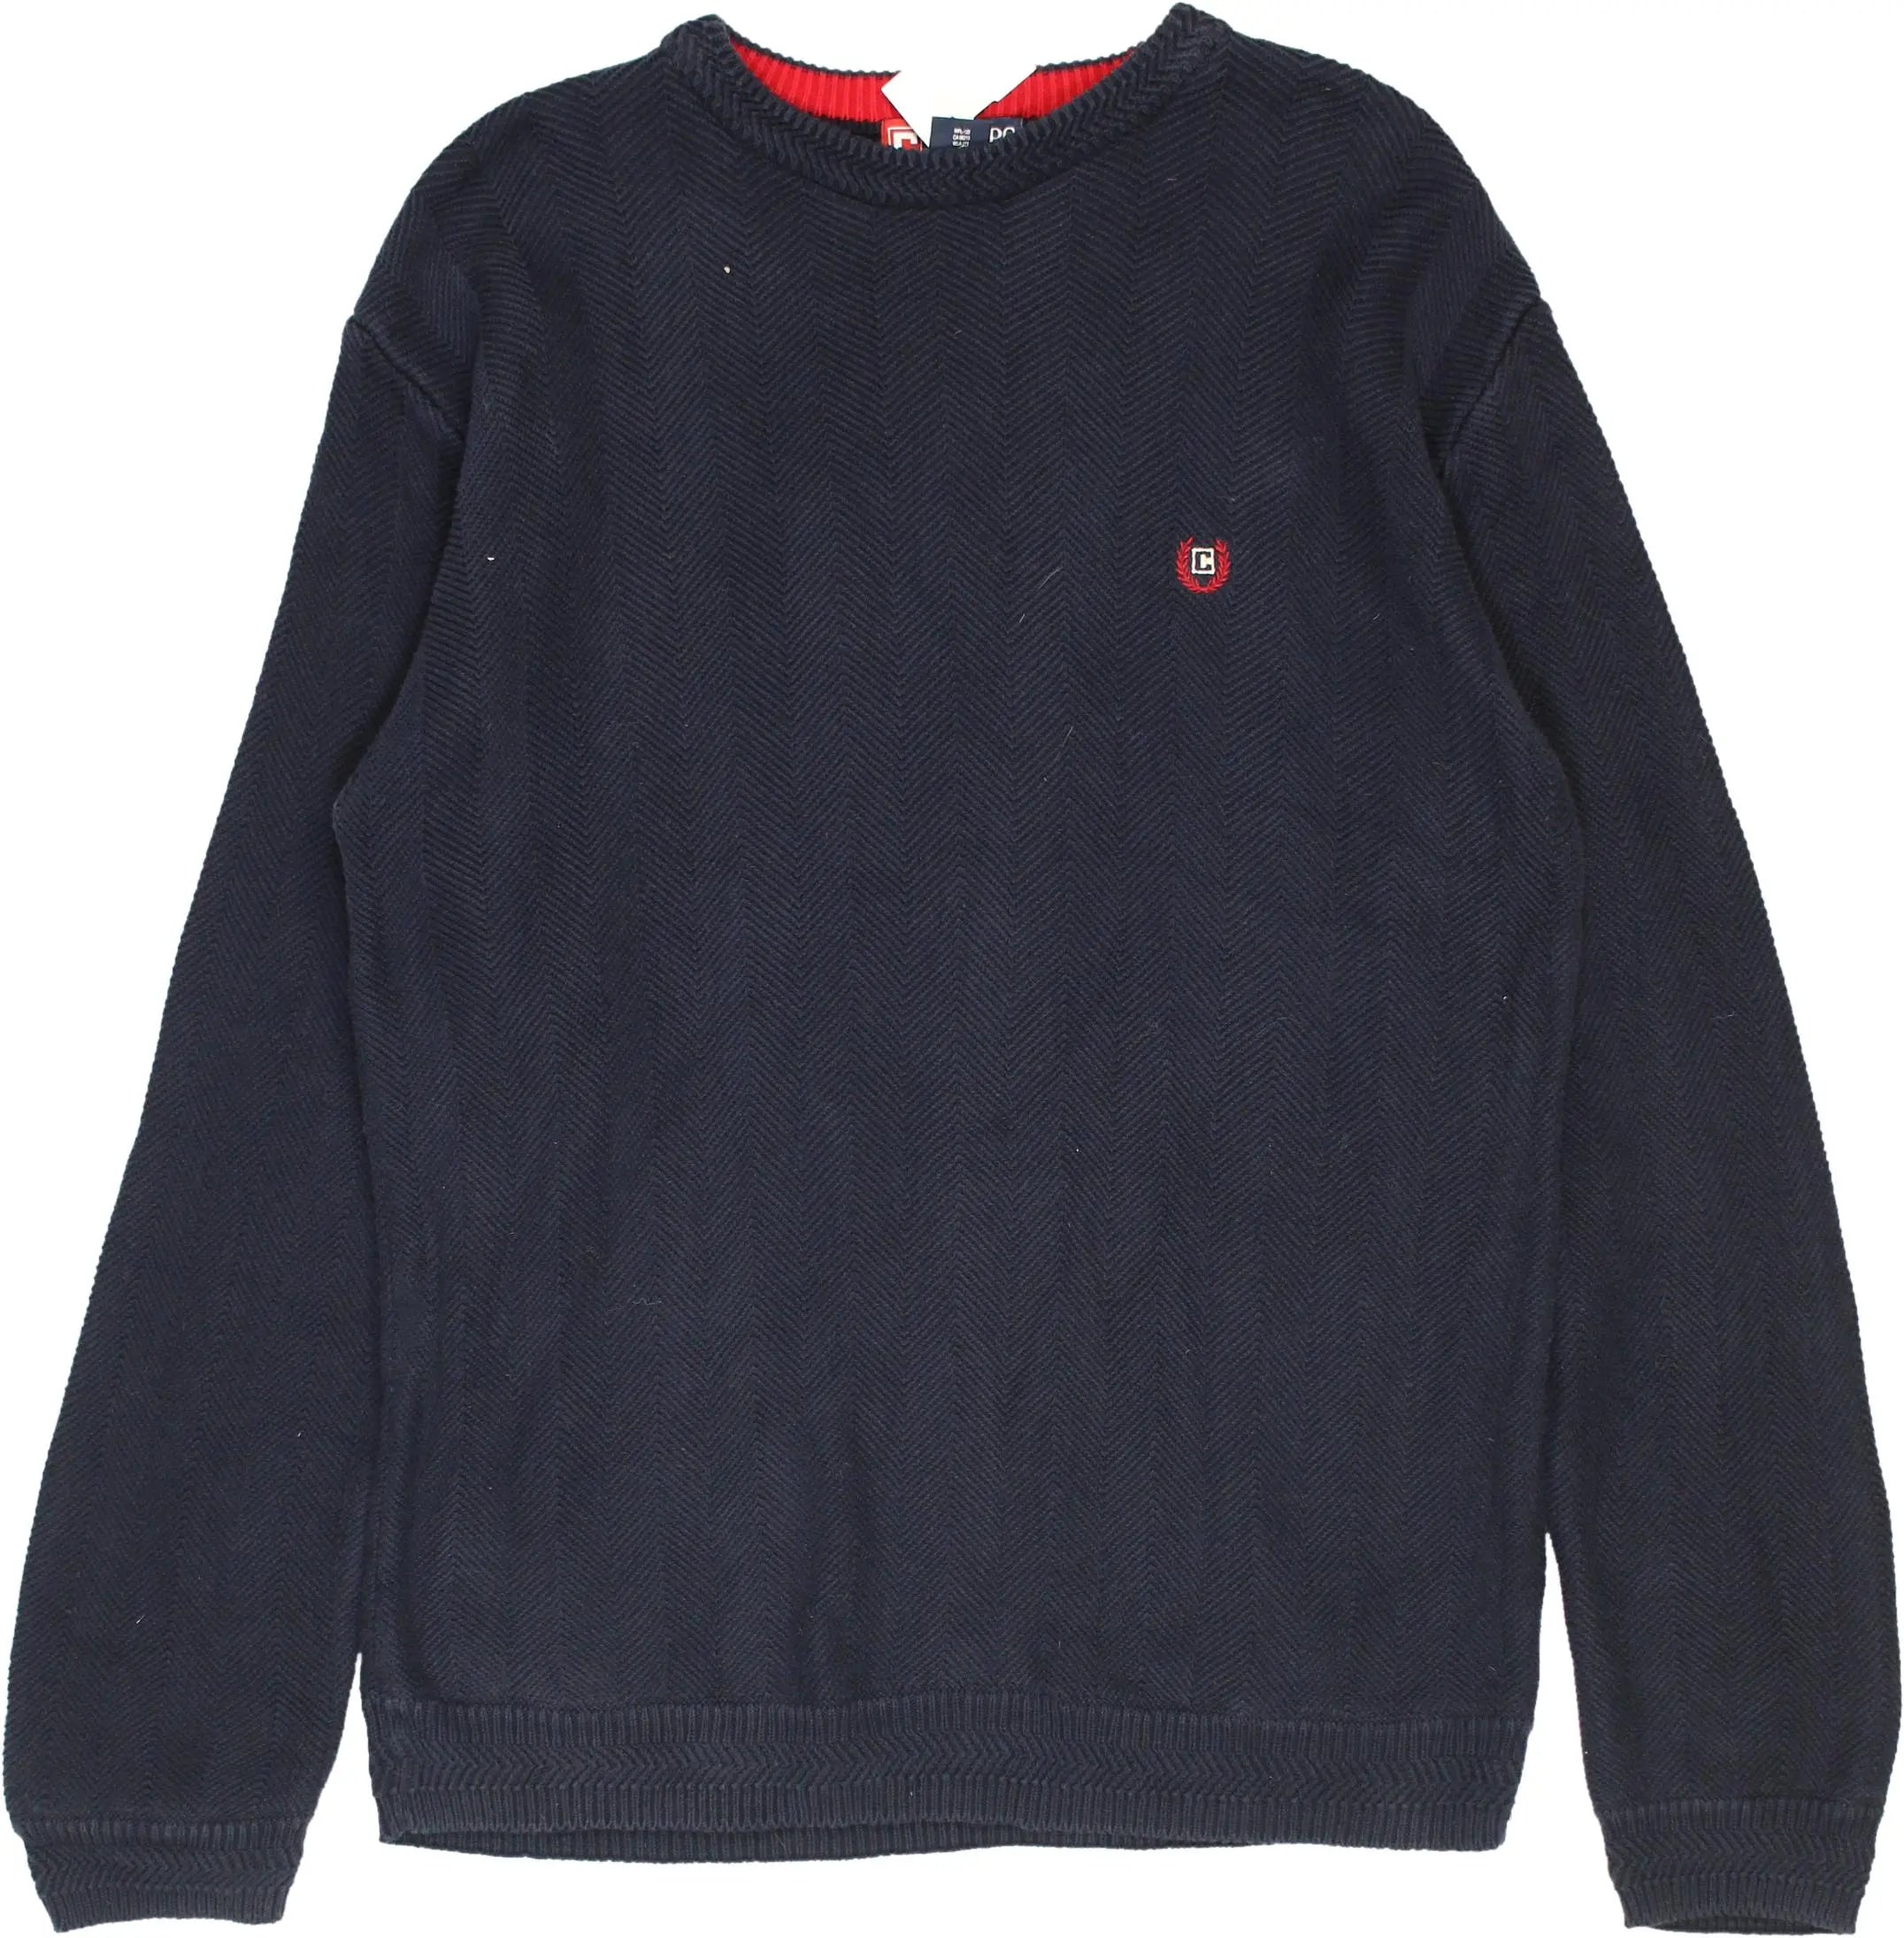 Chaps - Navy jumper- ThriftTale.com - Vintage and second handclothing